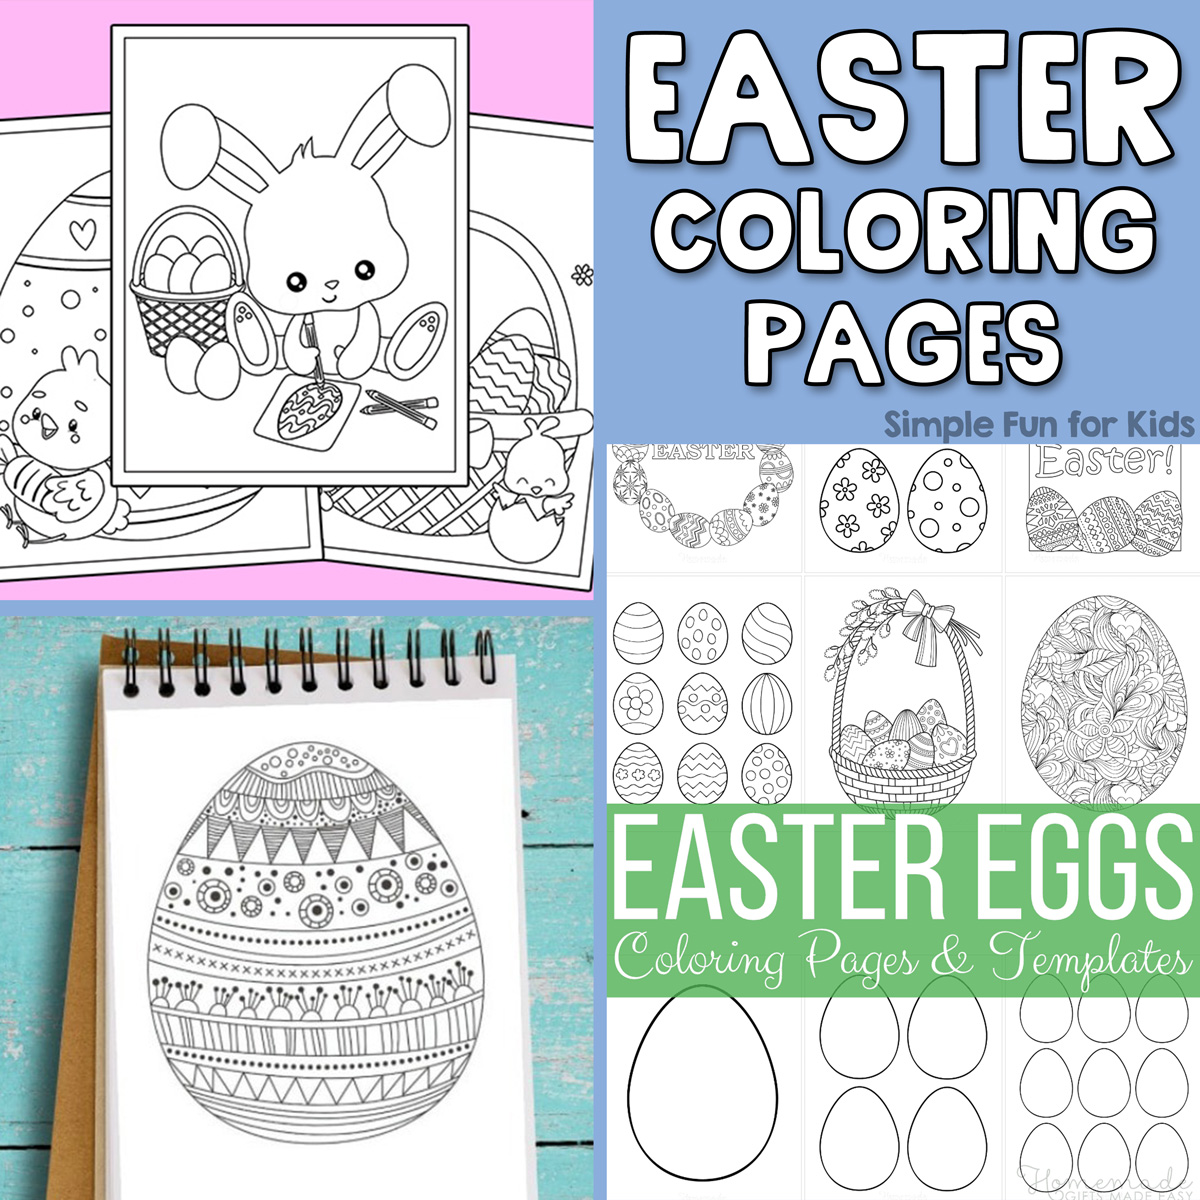 Printable Easter Coloring Pages: Easter bunny drawing, Easter egg coloring pages for grownups.